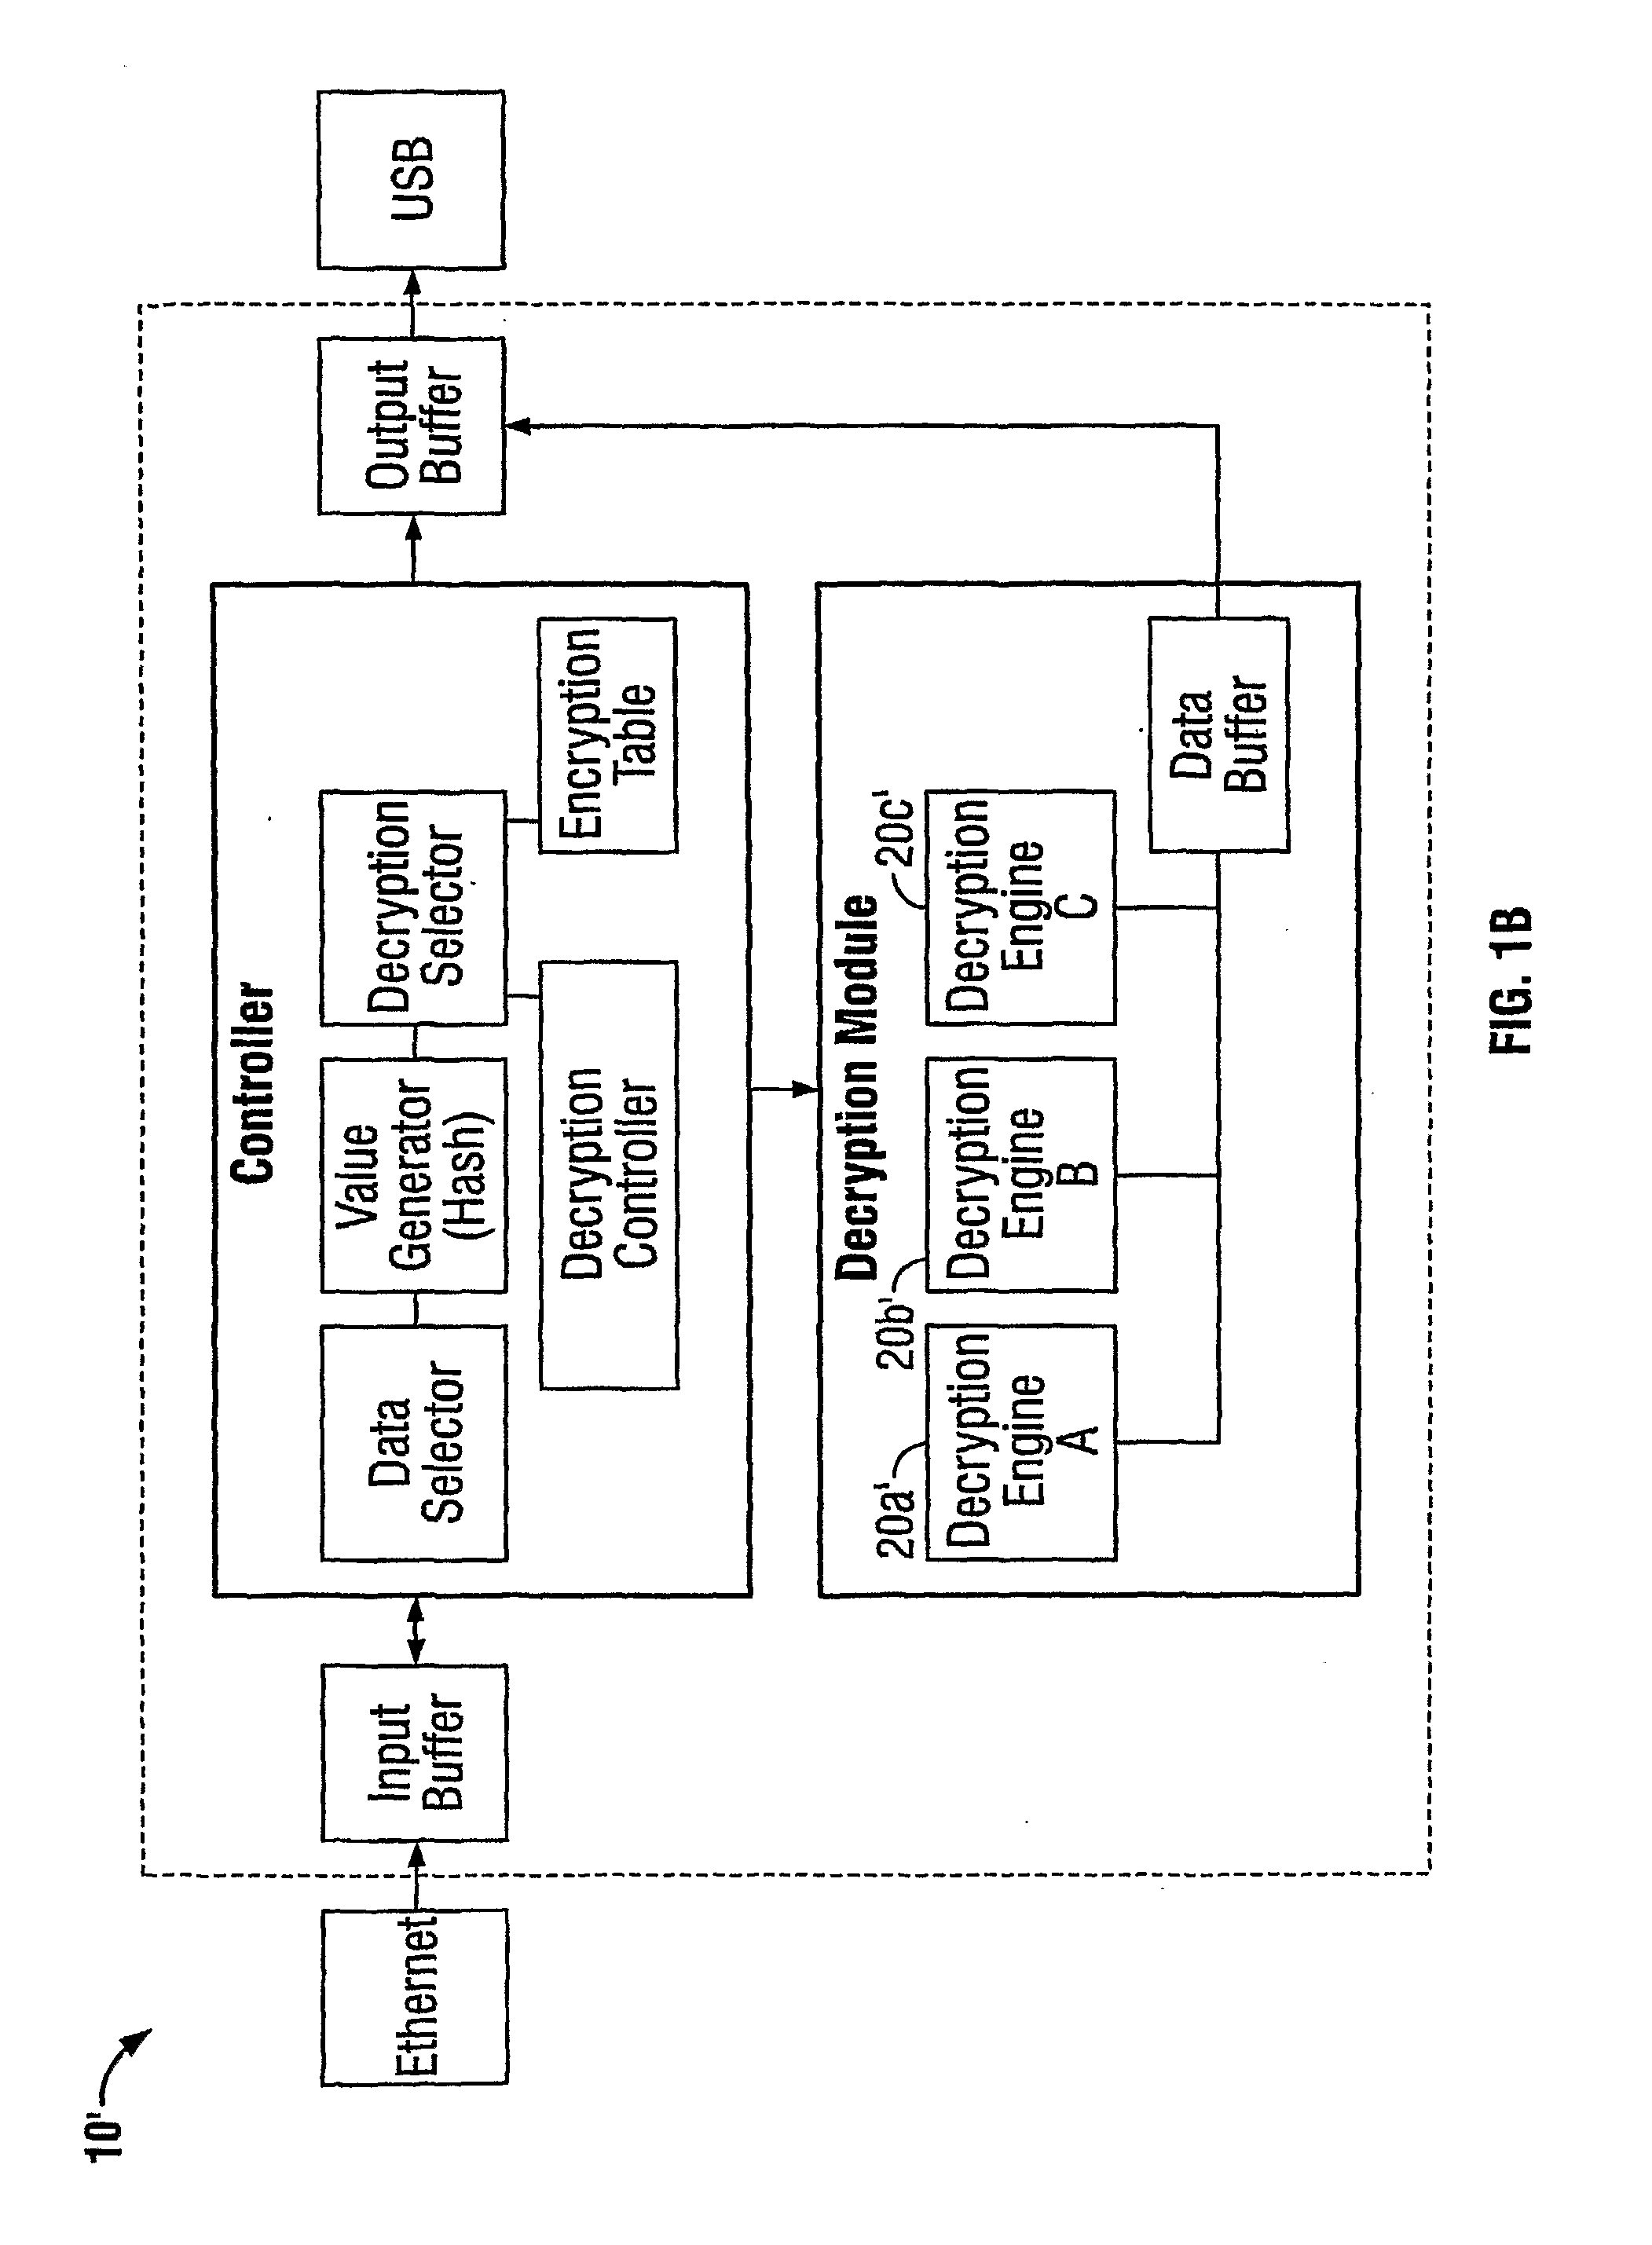 Method and apparatus for cryptographically processing data